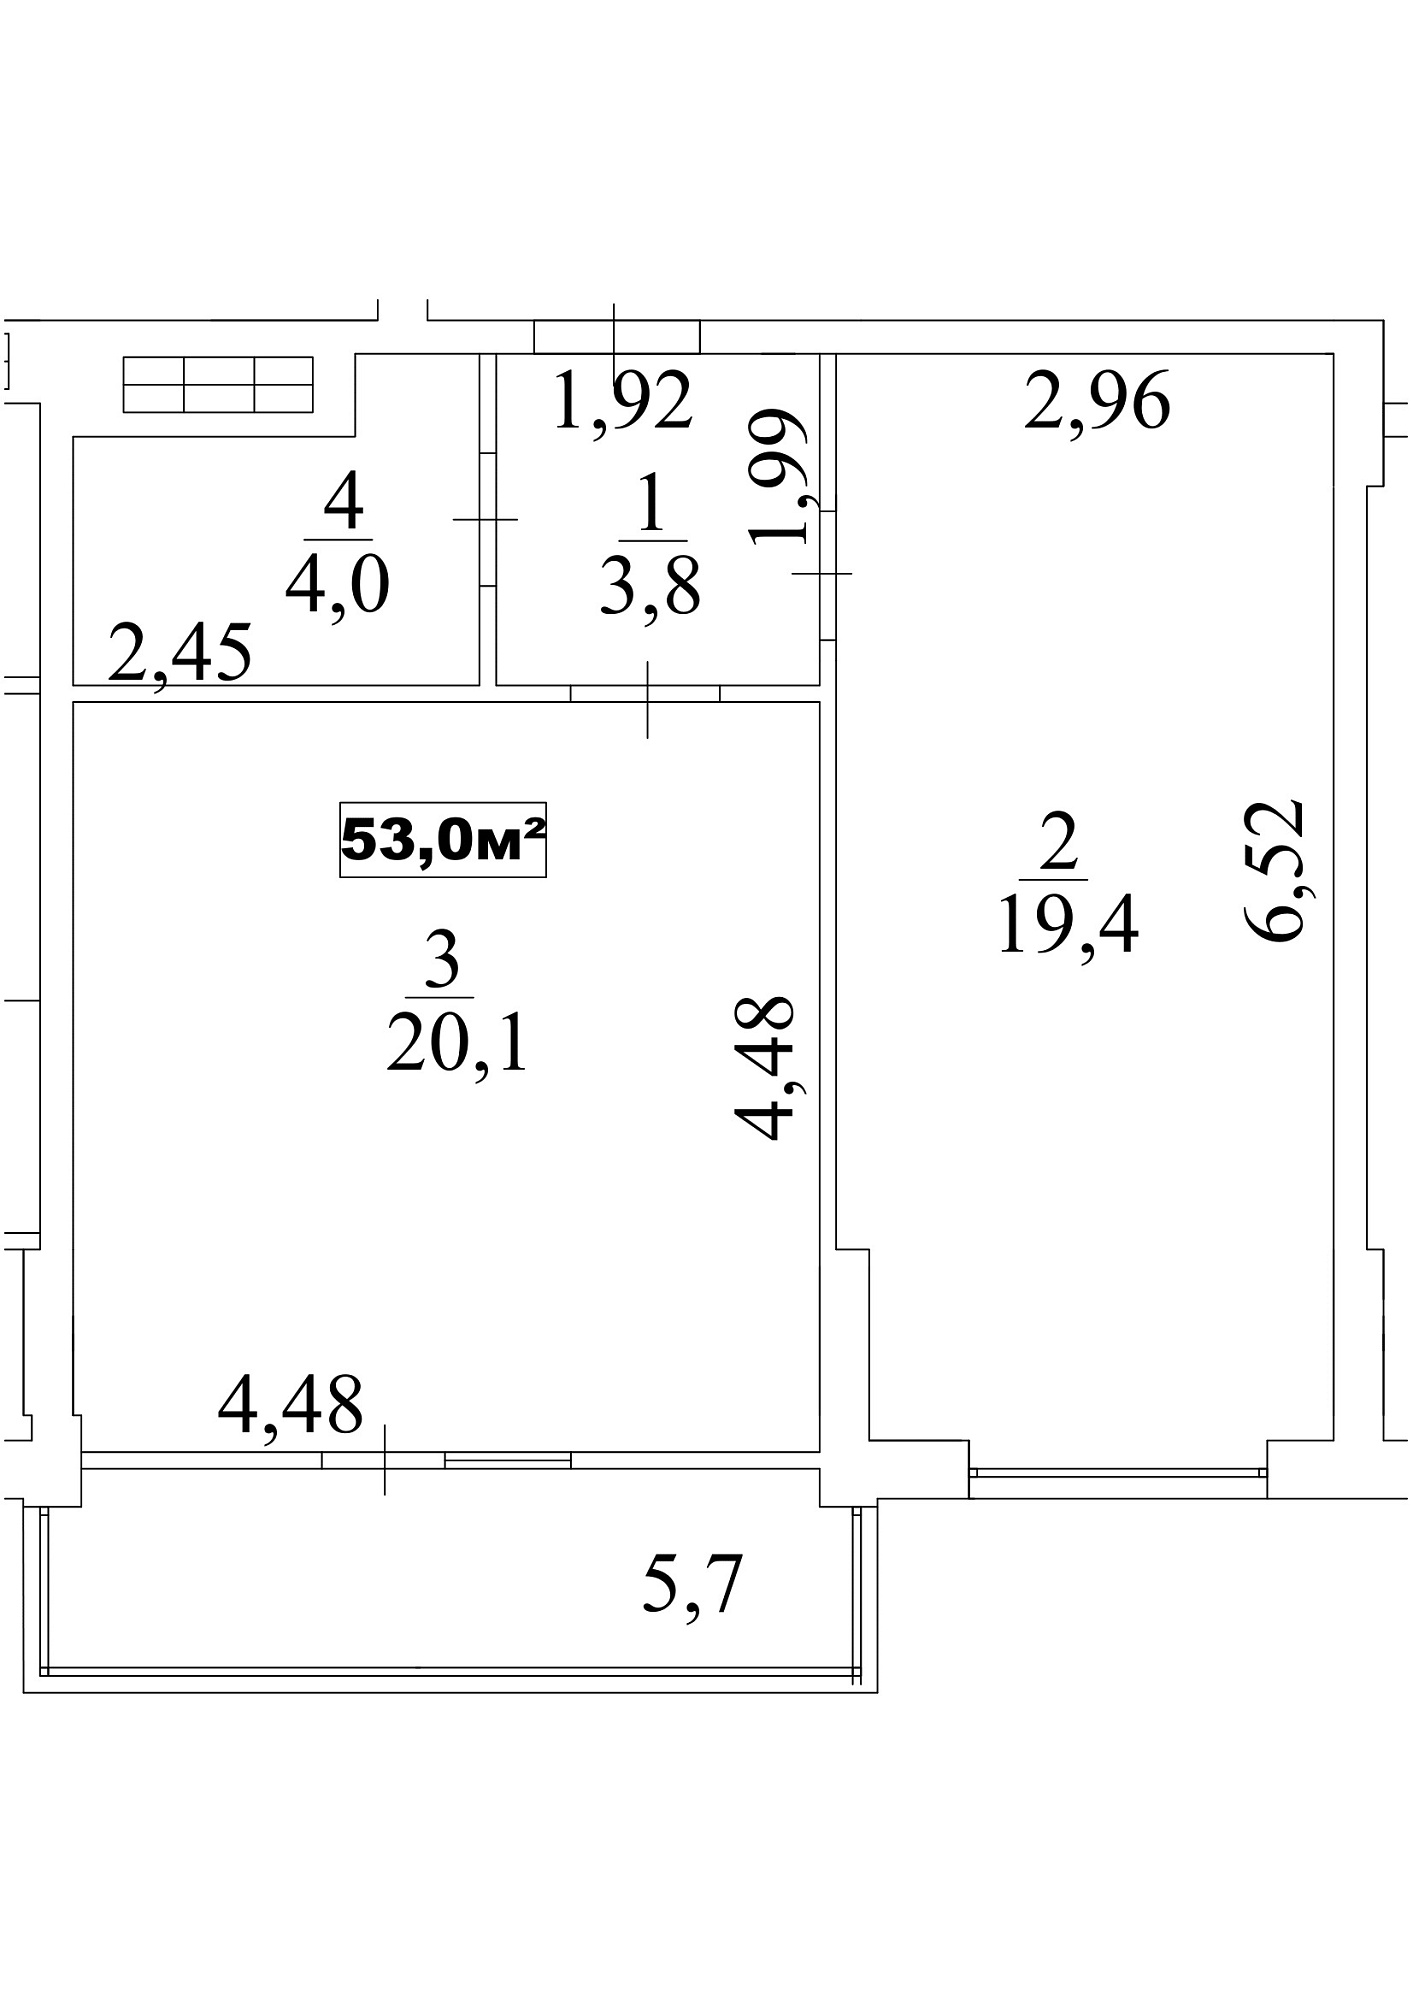 Planning 1-rm flats area 53m2, AB-10-10/00089.